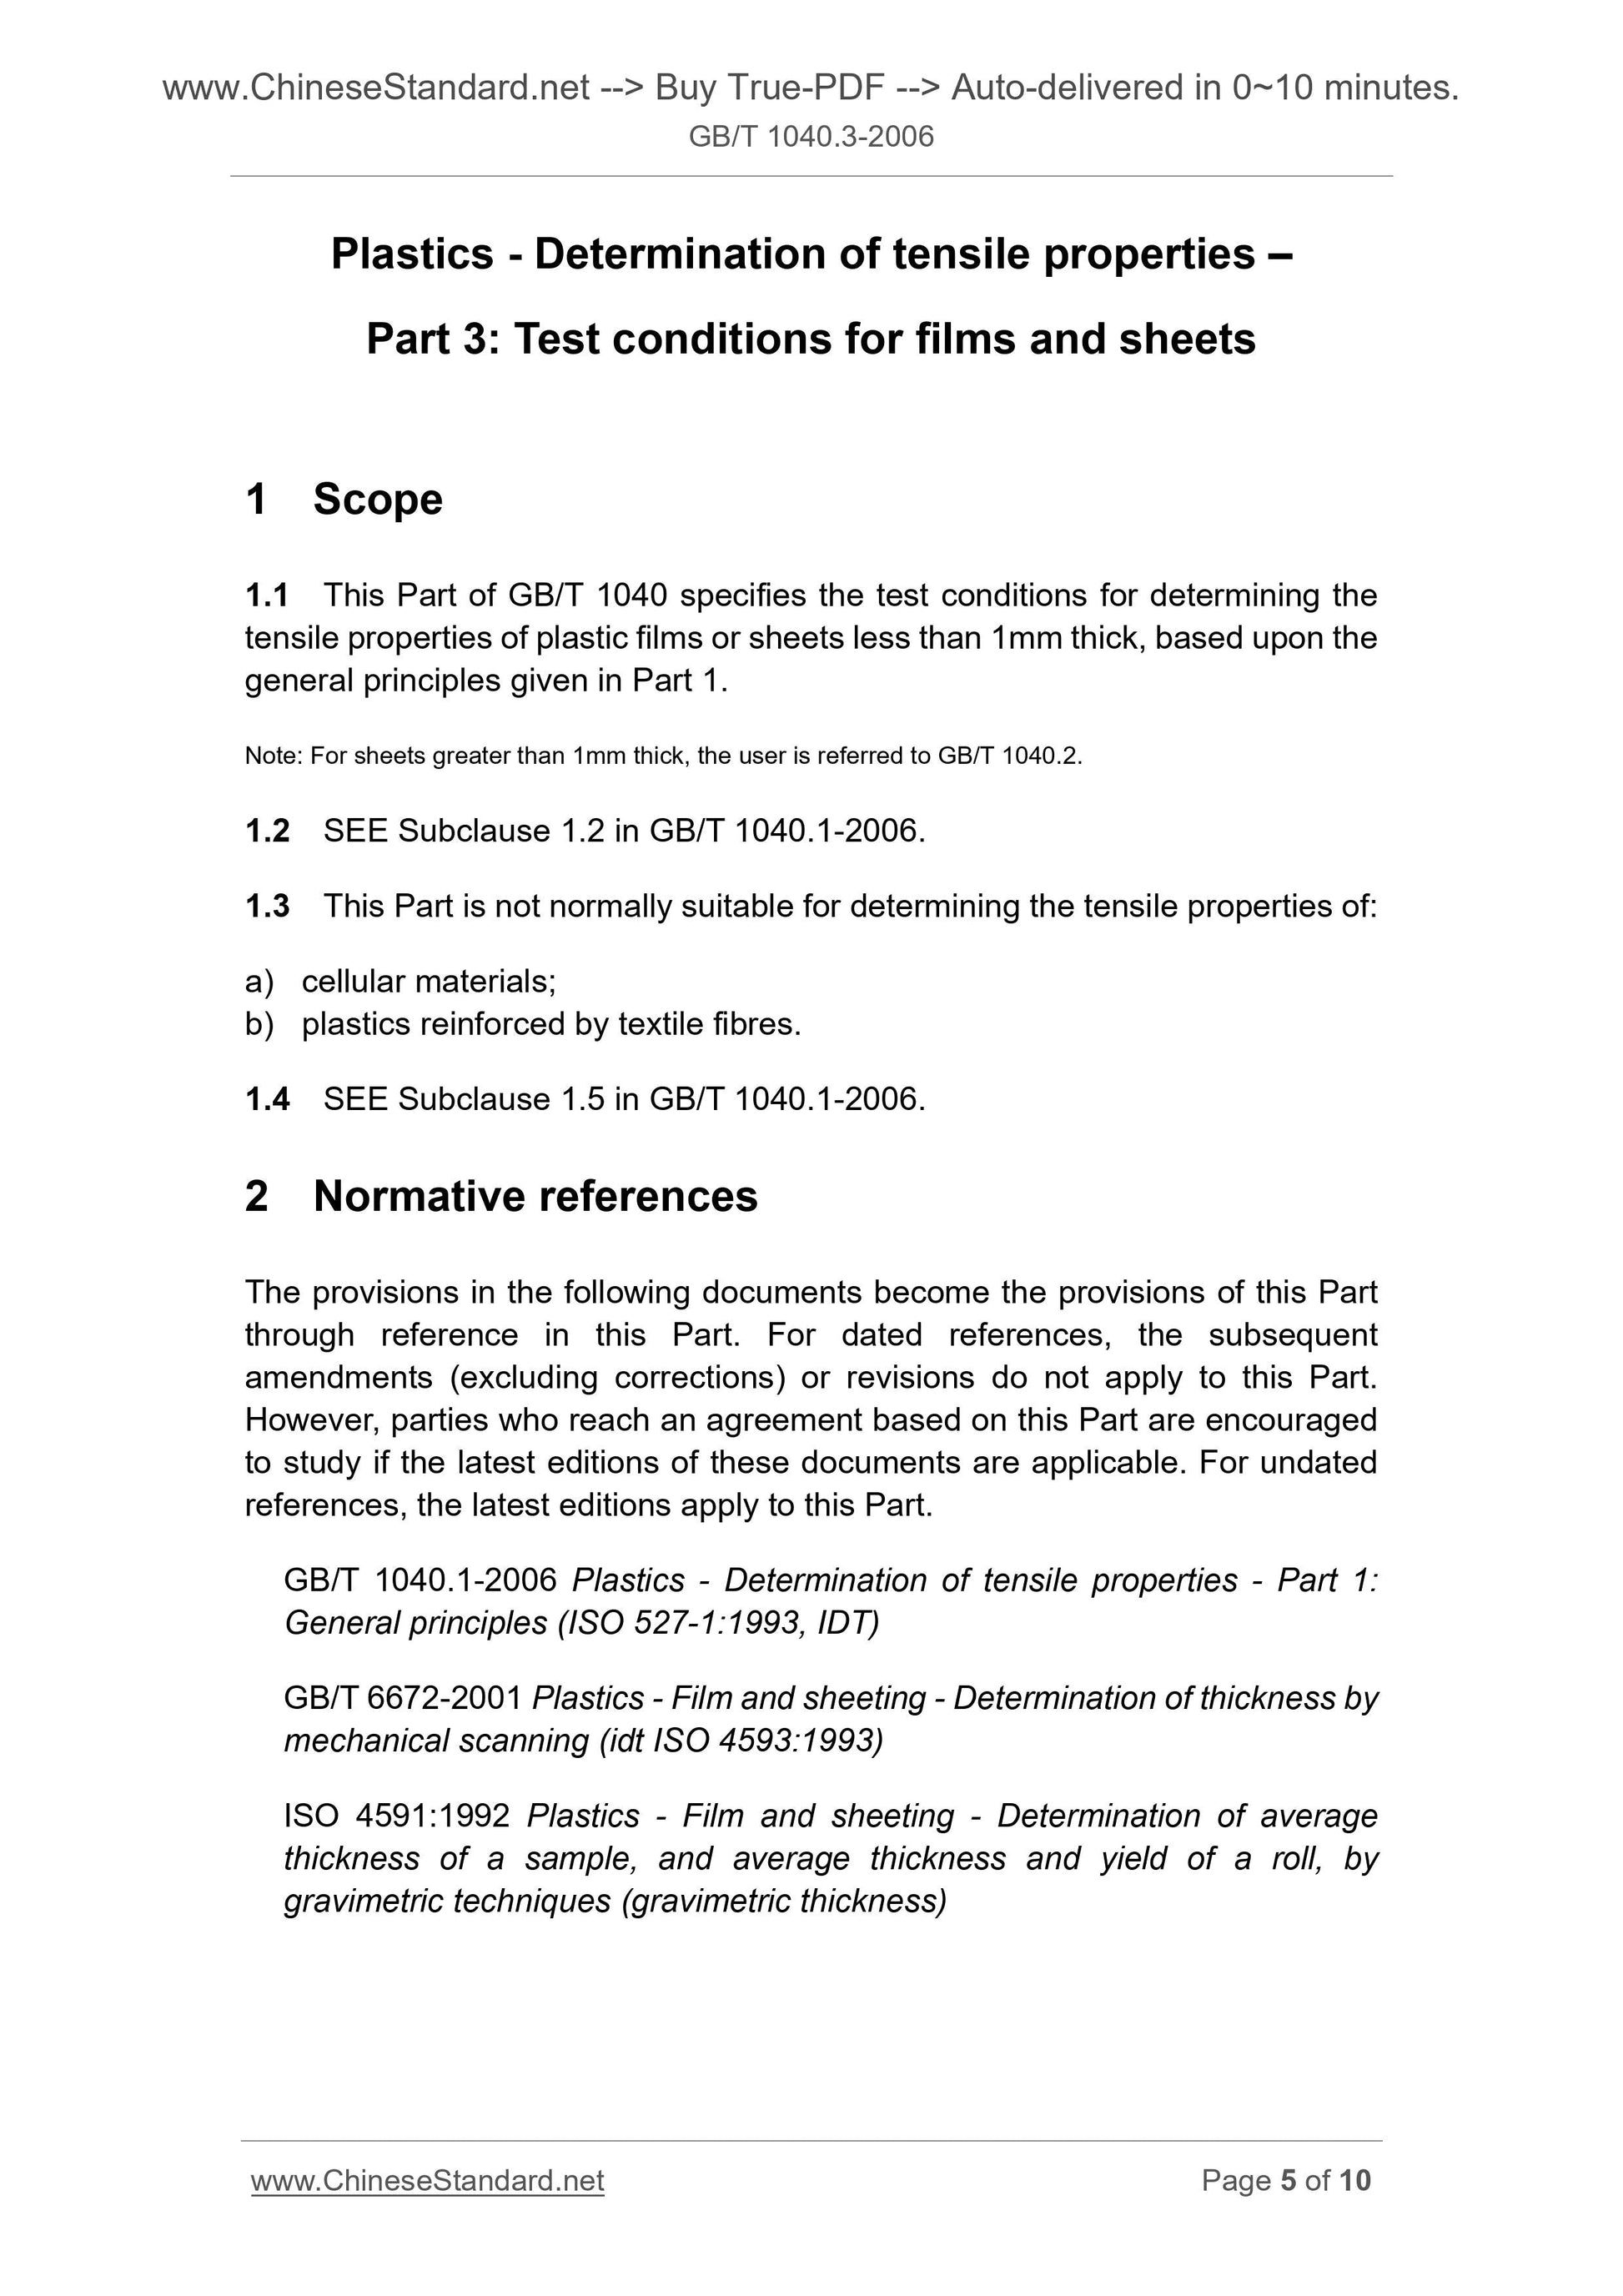 GB/T 1040.3-2006 Page 5